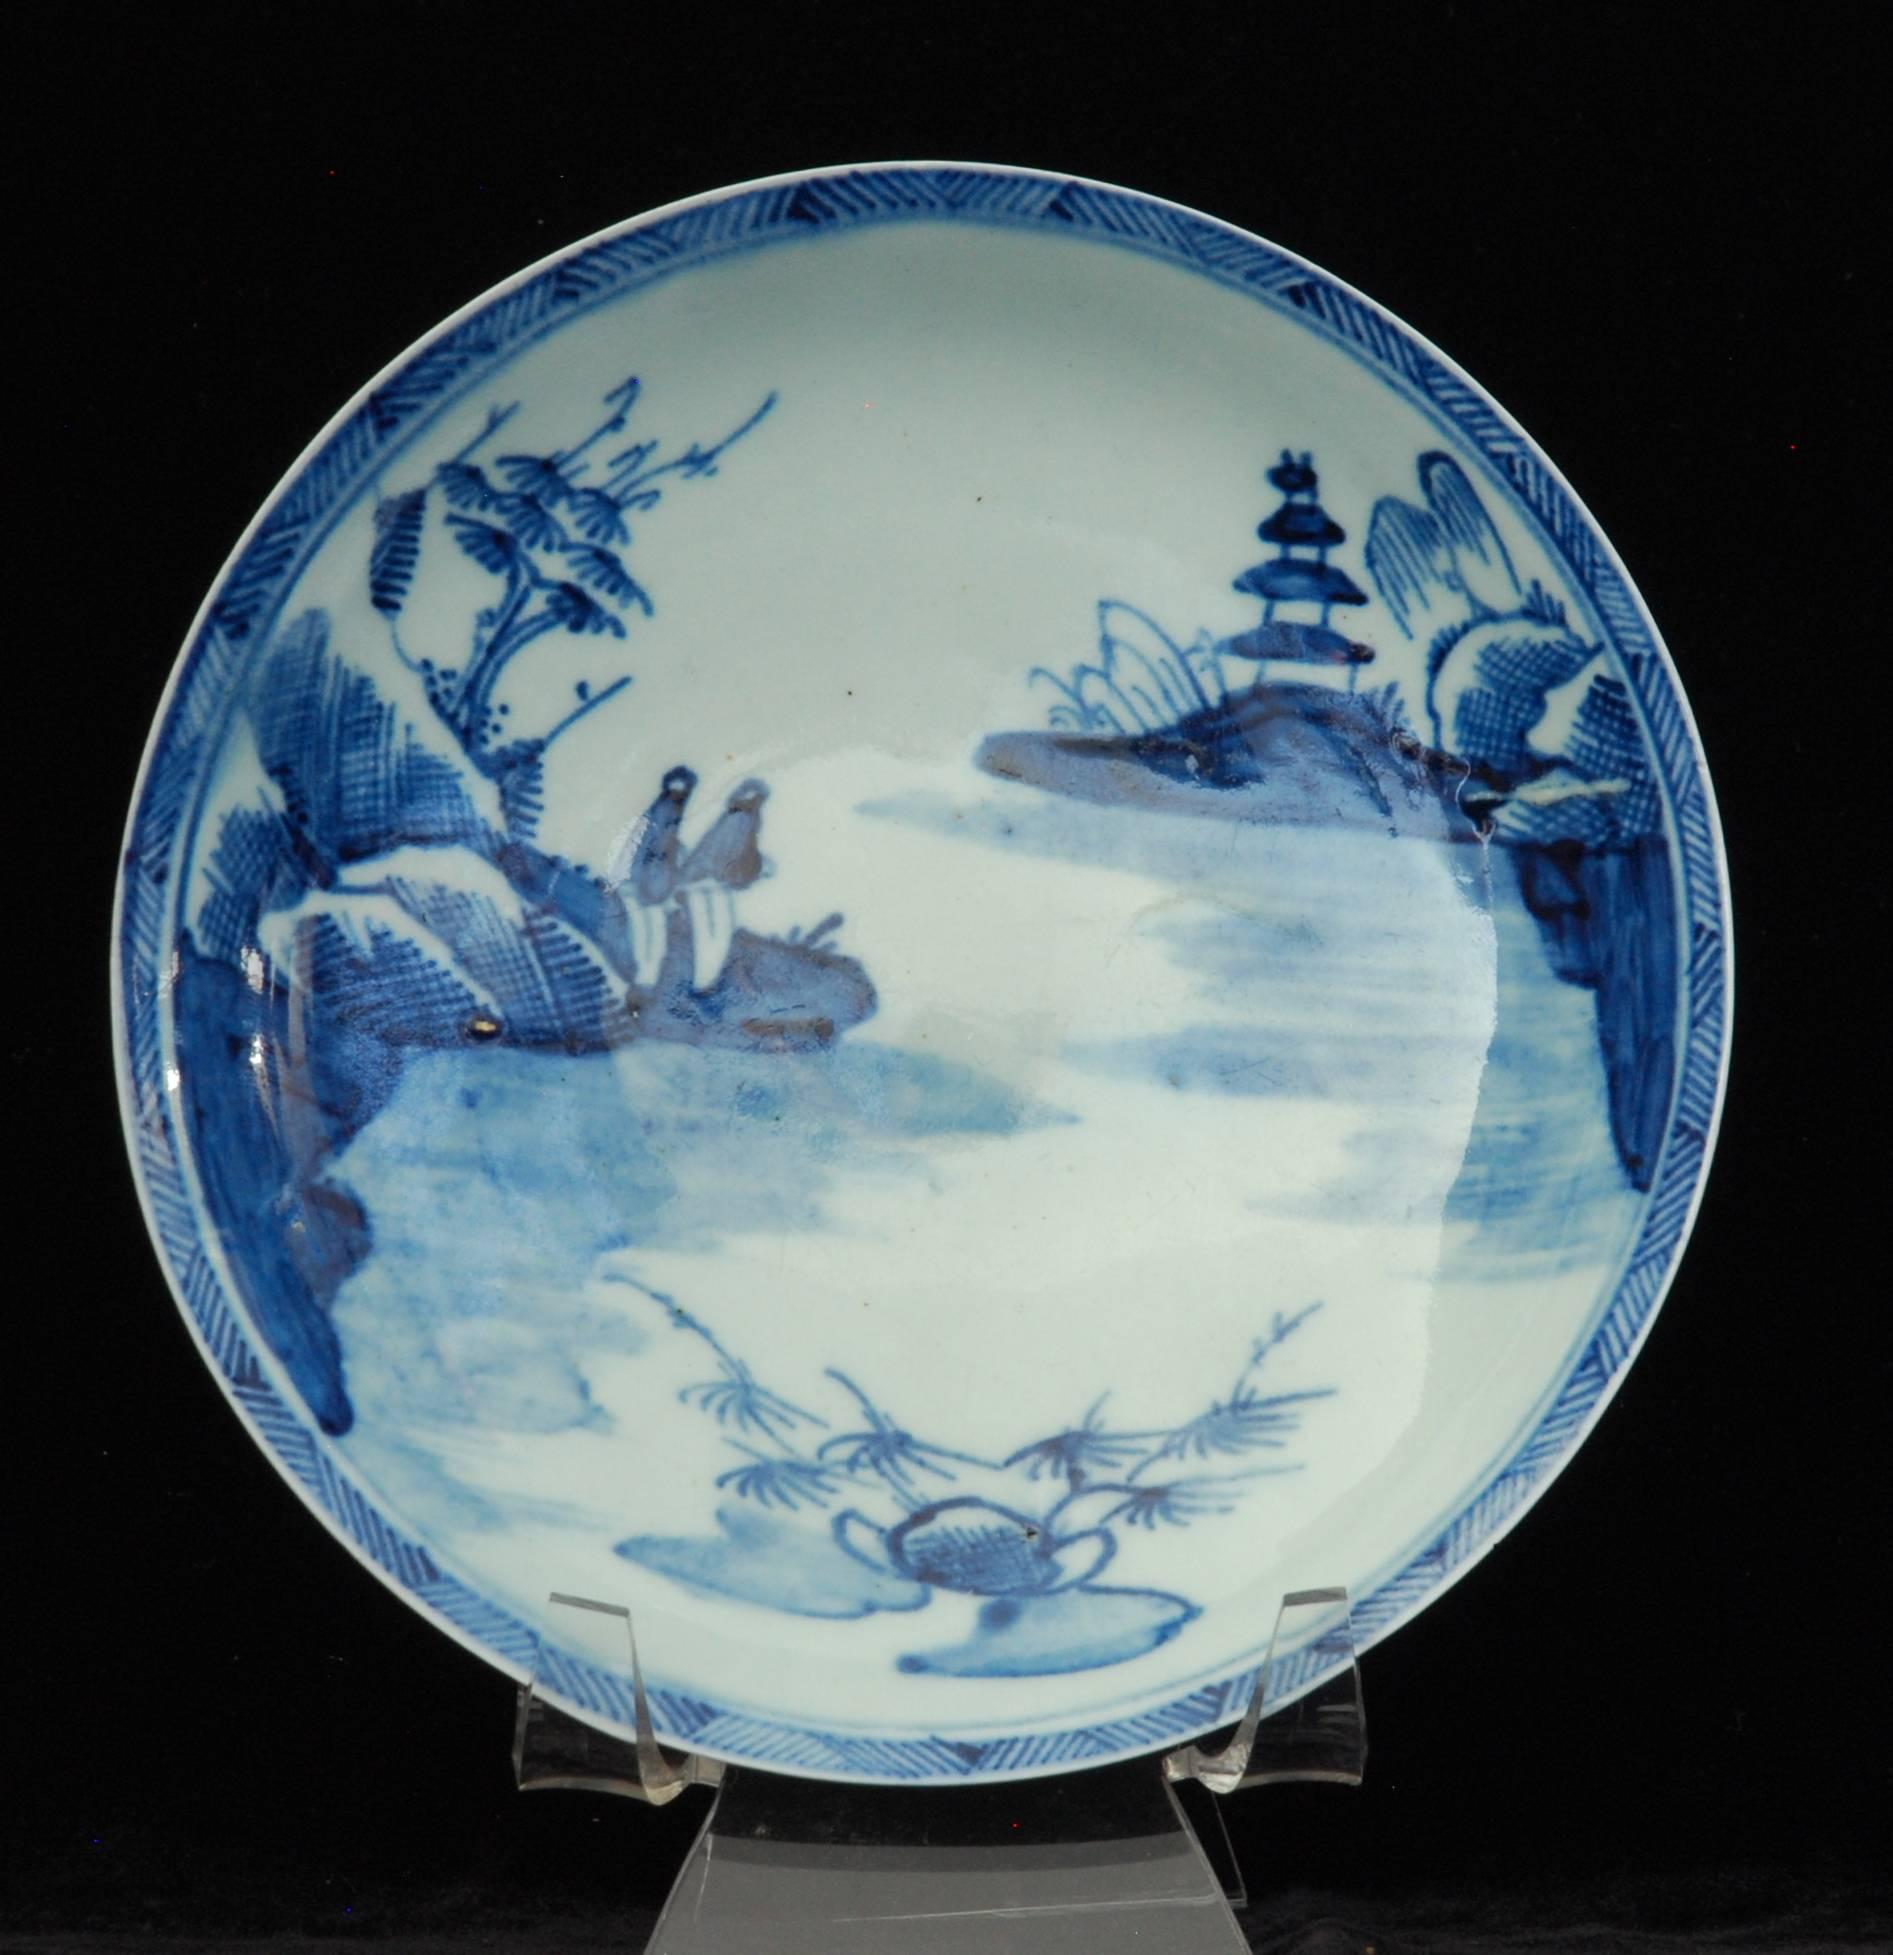 A porcelain tea bowl and saucer from one of the Liverpool makers, painted with a chinoiserie scene. The use of the white porcelain to form the shine on the river is very pleasing.